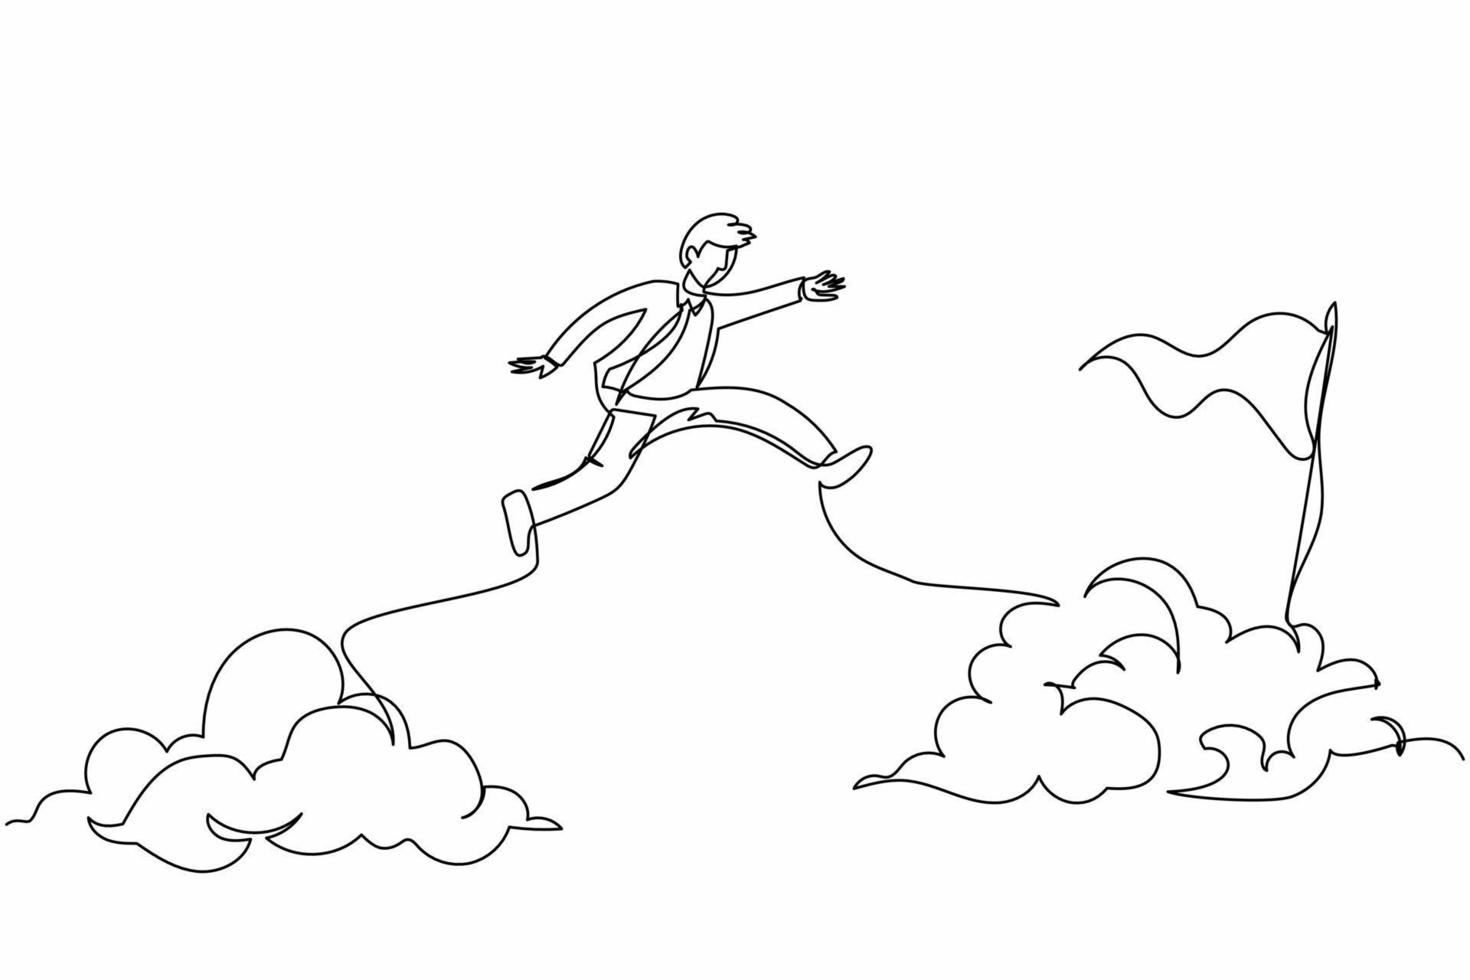 Continuous one line drawing active businessman jump or leap over clouds to reach his success target or flag. Challenge his career path. Taking risk. Single line draw design vector graphic illustration